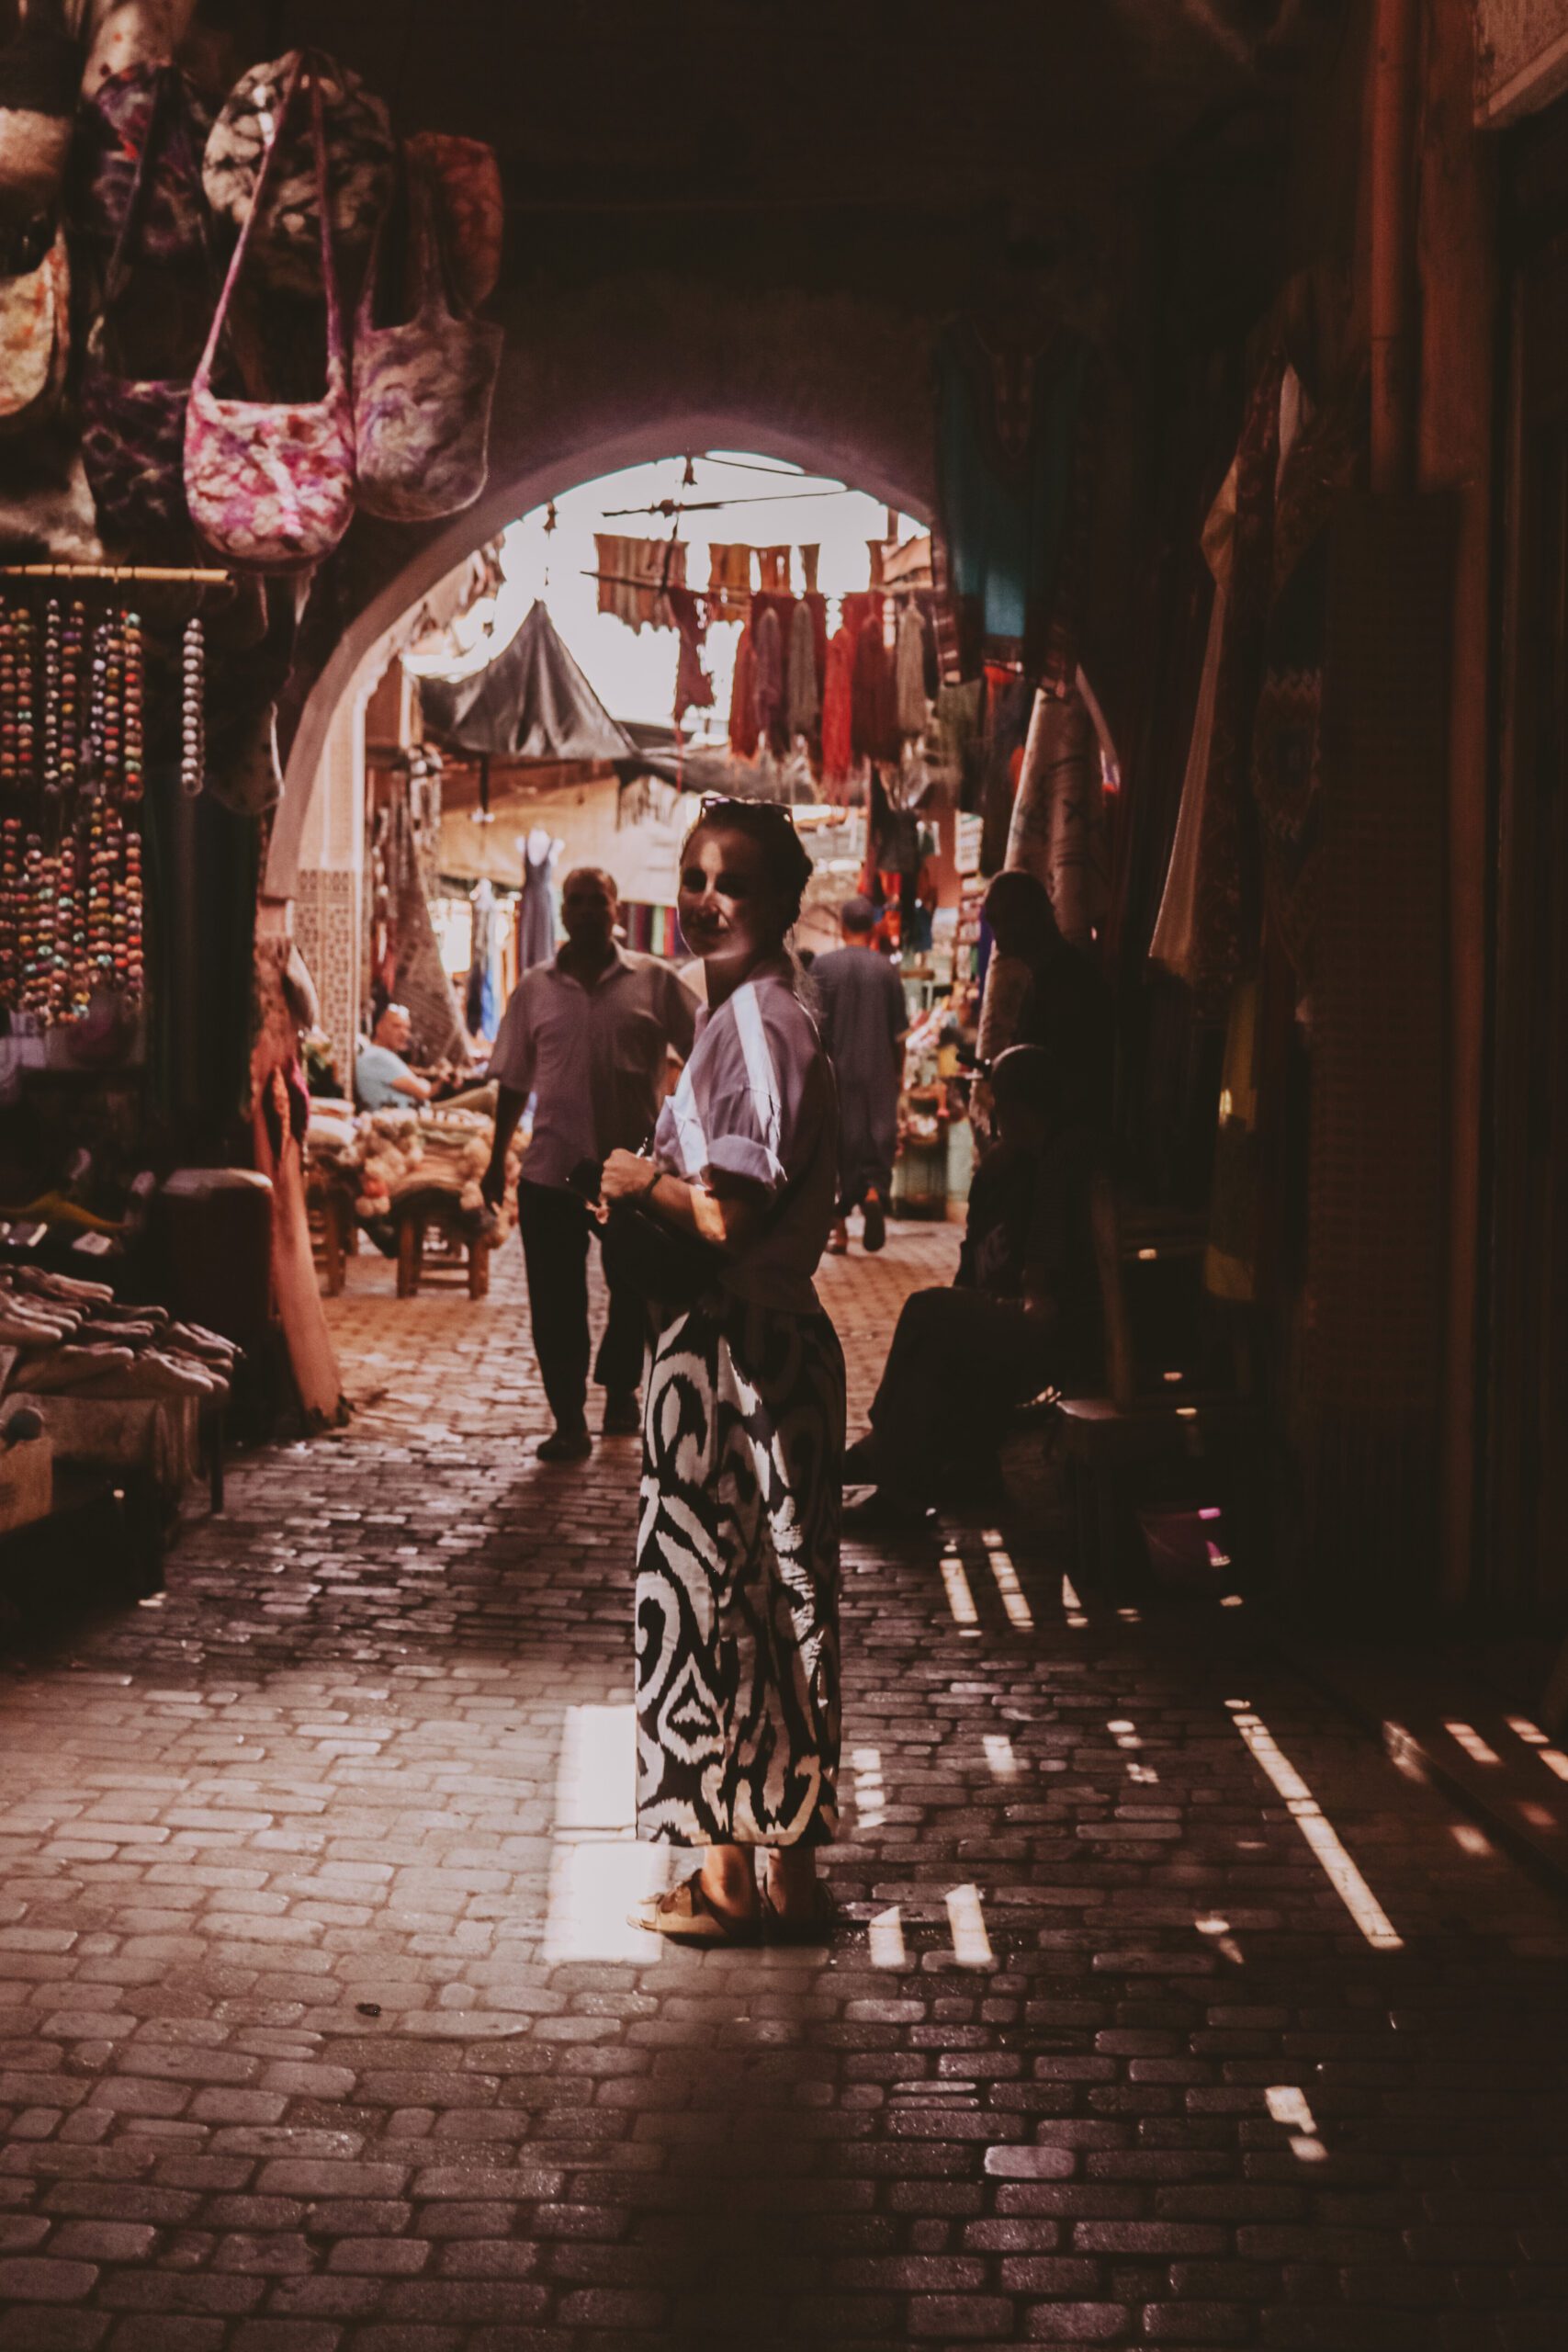 A woman standing in shadows in an alley in Morocco, wearing a long, patterned dress looks back at the camera. Sororal X Morocco